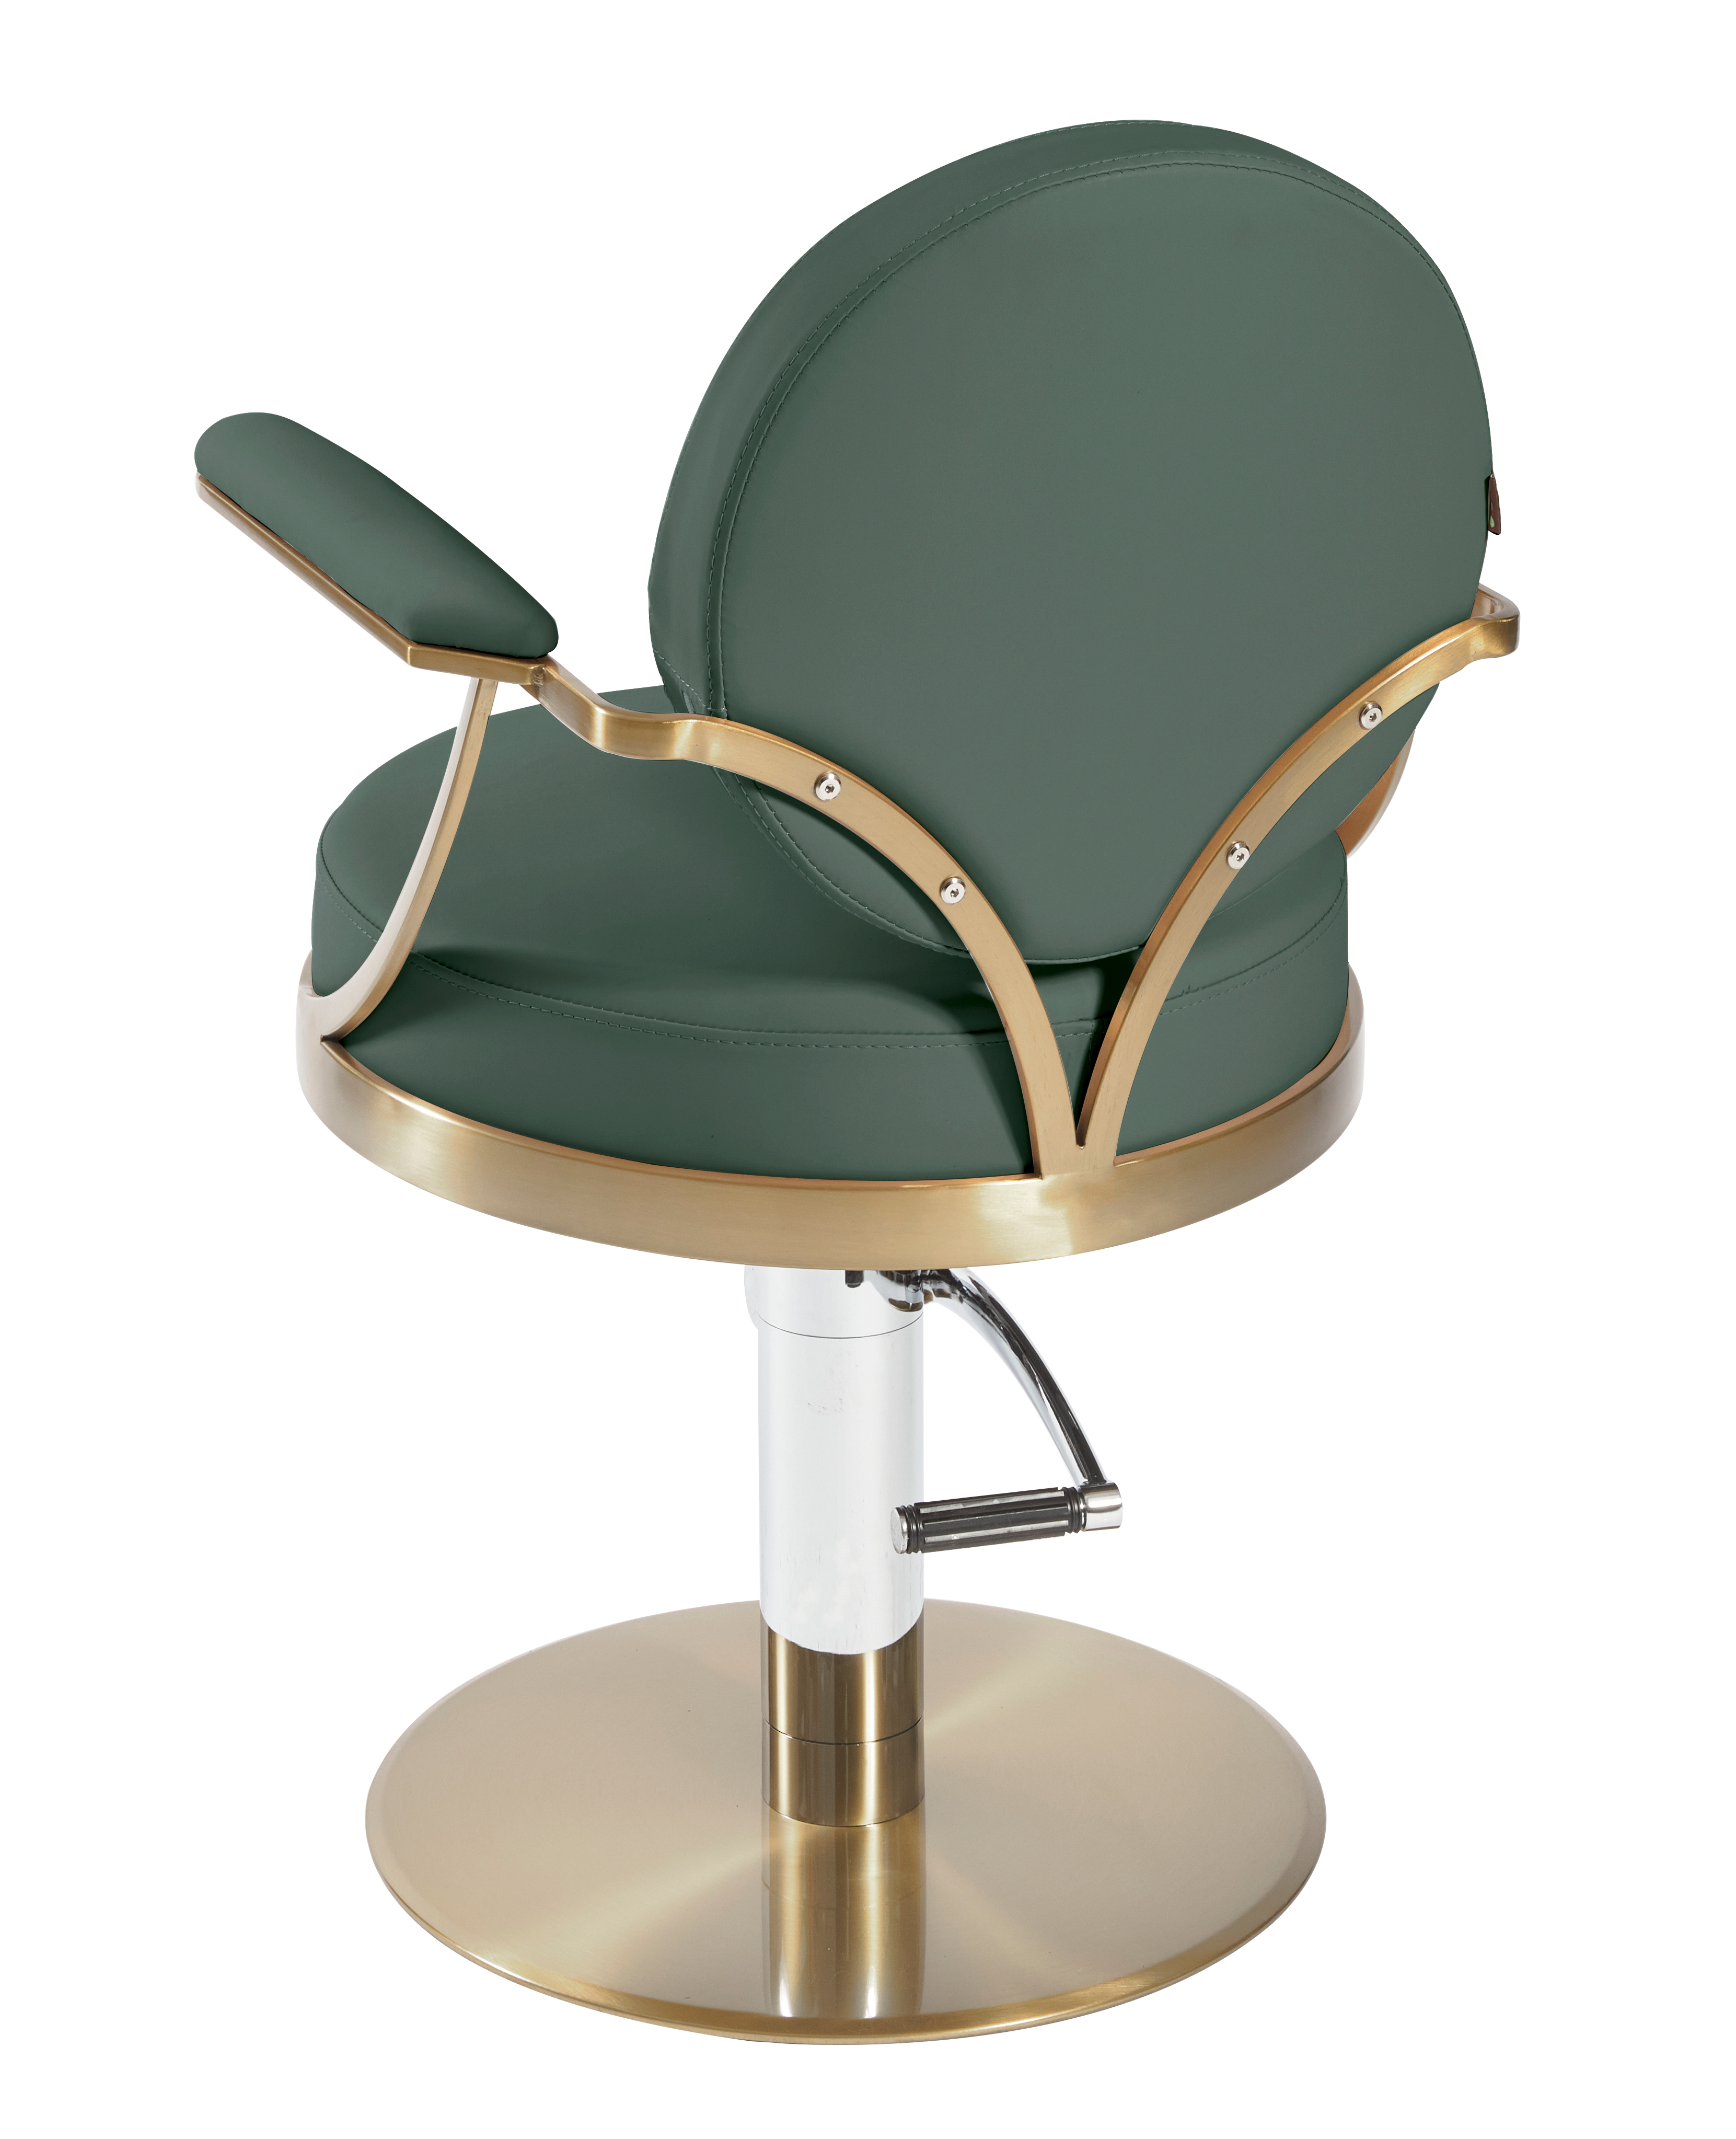 The Tulip Salon Styling Chair - Green & Gold by SEC